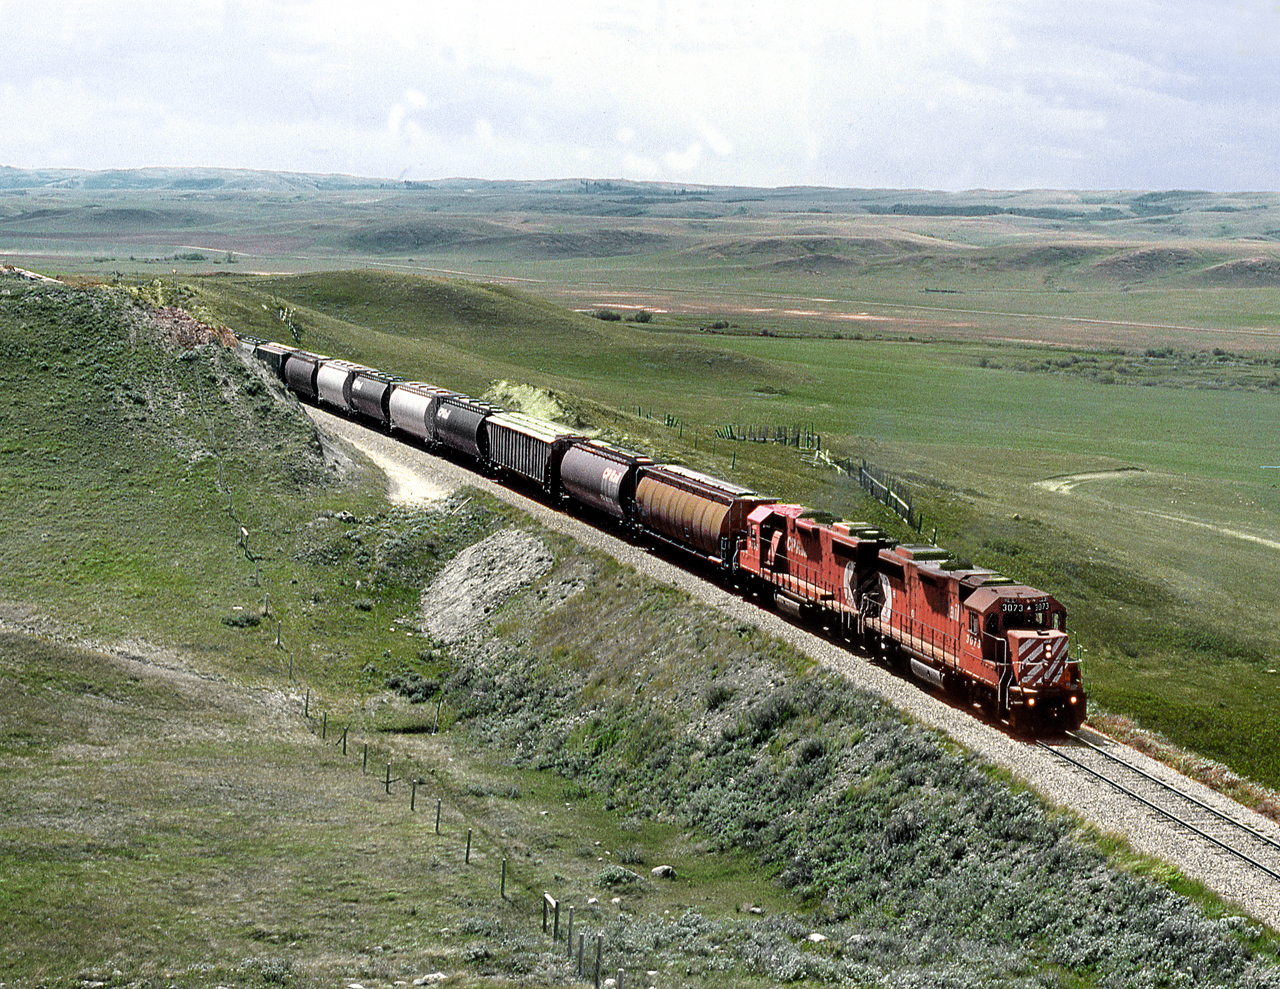 The eastbound Shaunavon Tramp on a run run from Frontier to Shaunavon climbs out out of the Eastend Coulee on the south side of the CYpress Hills